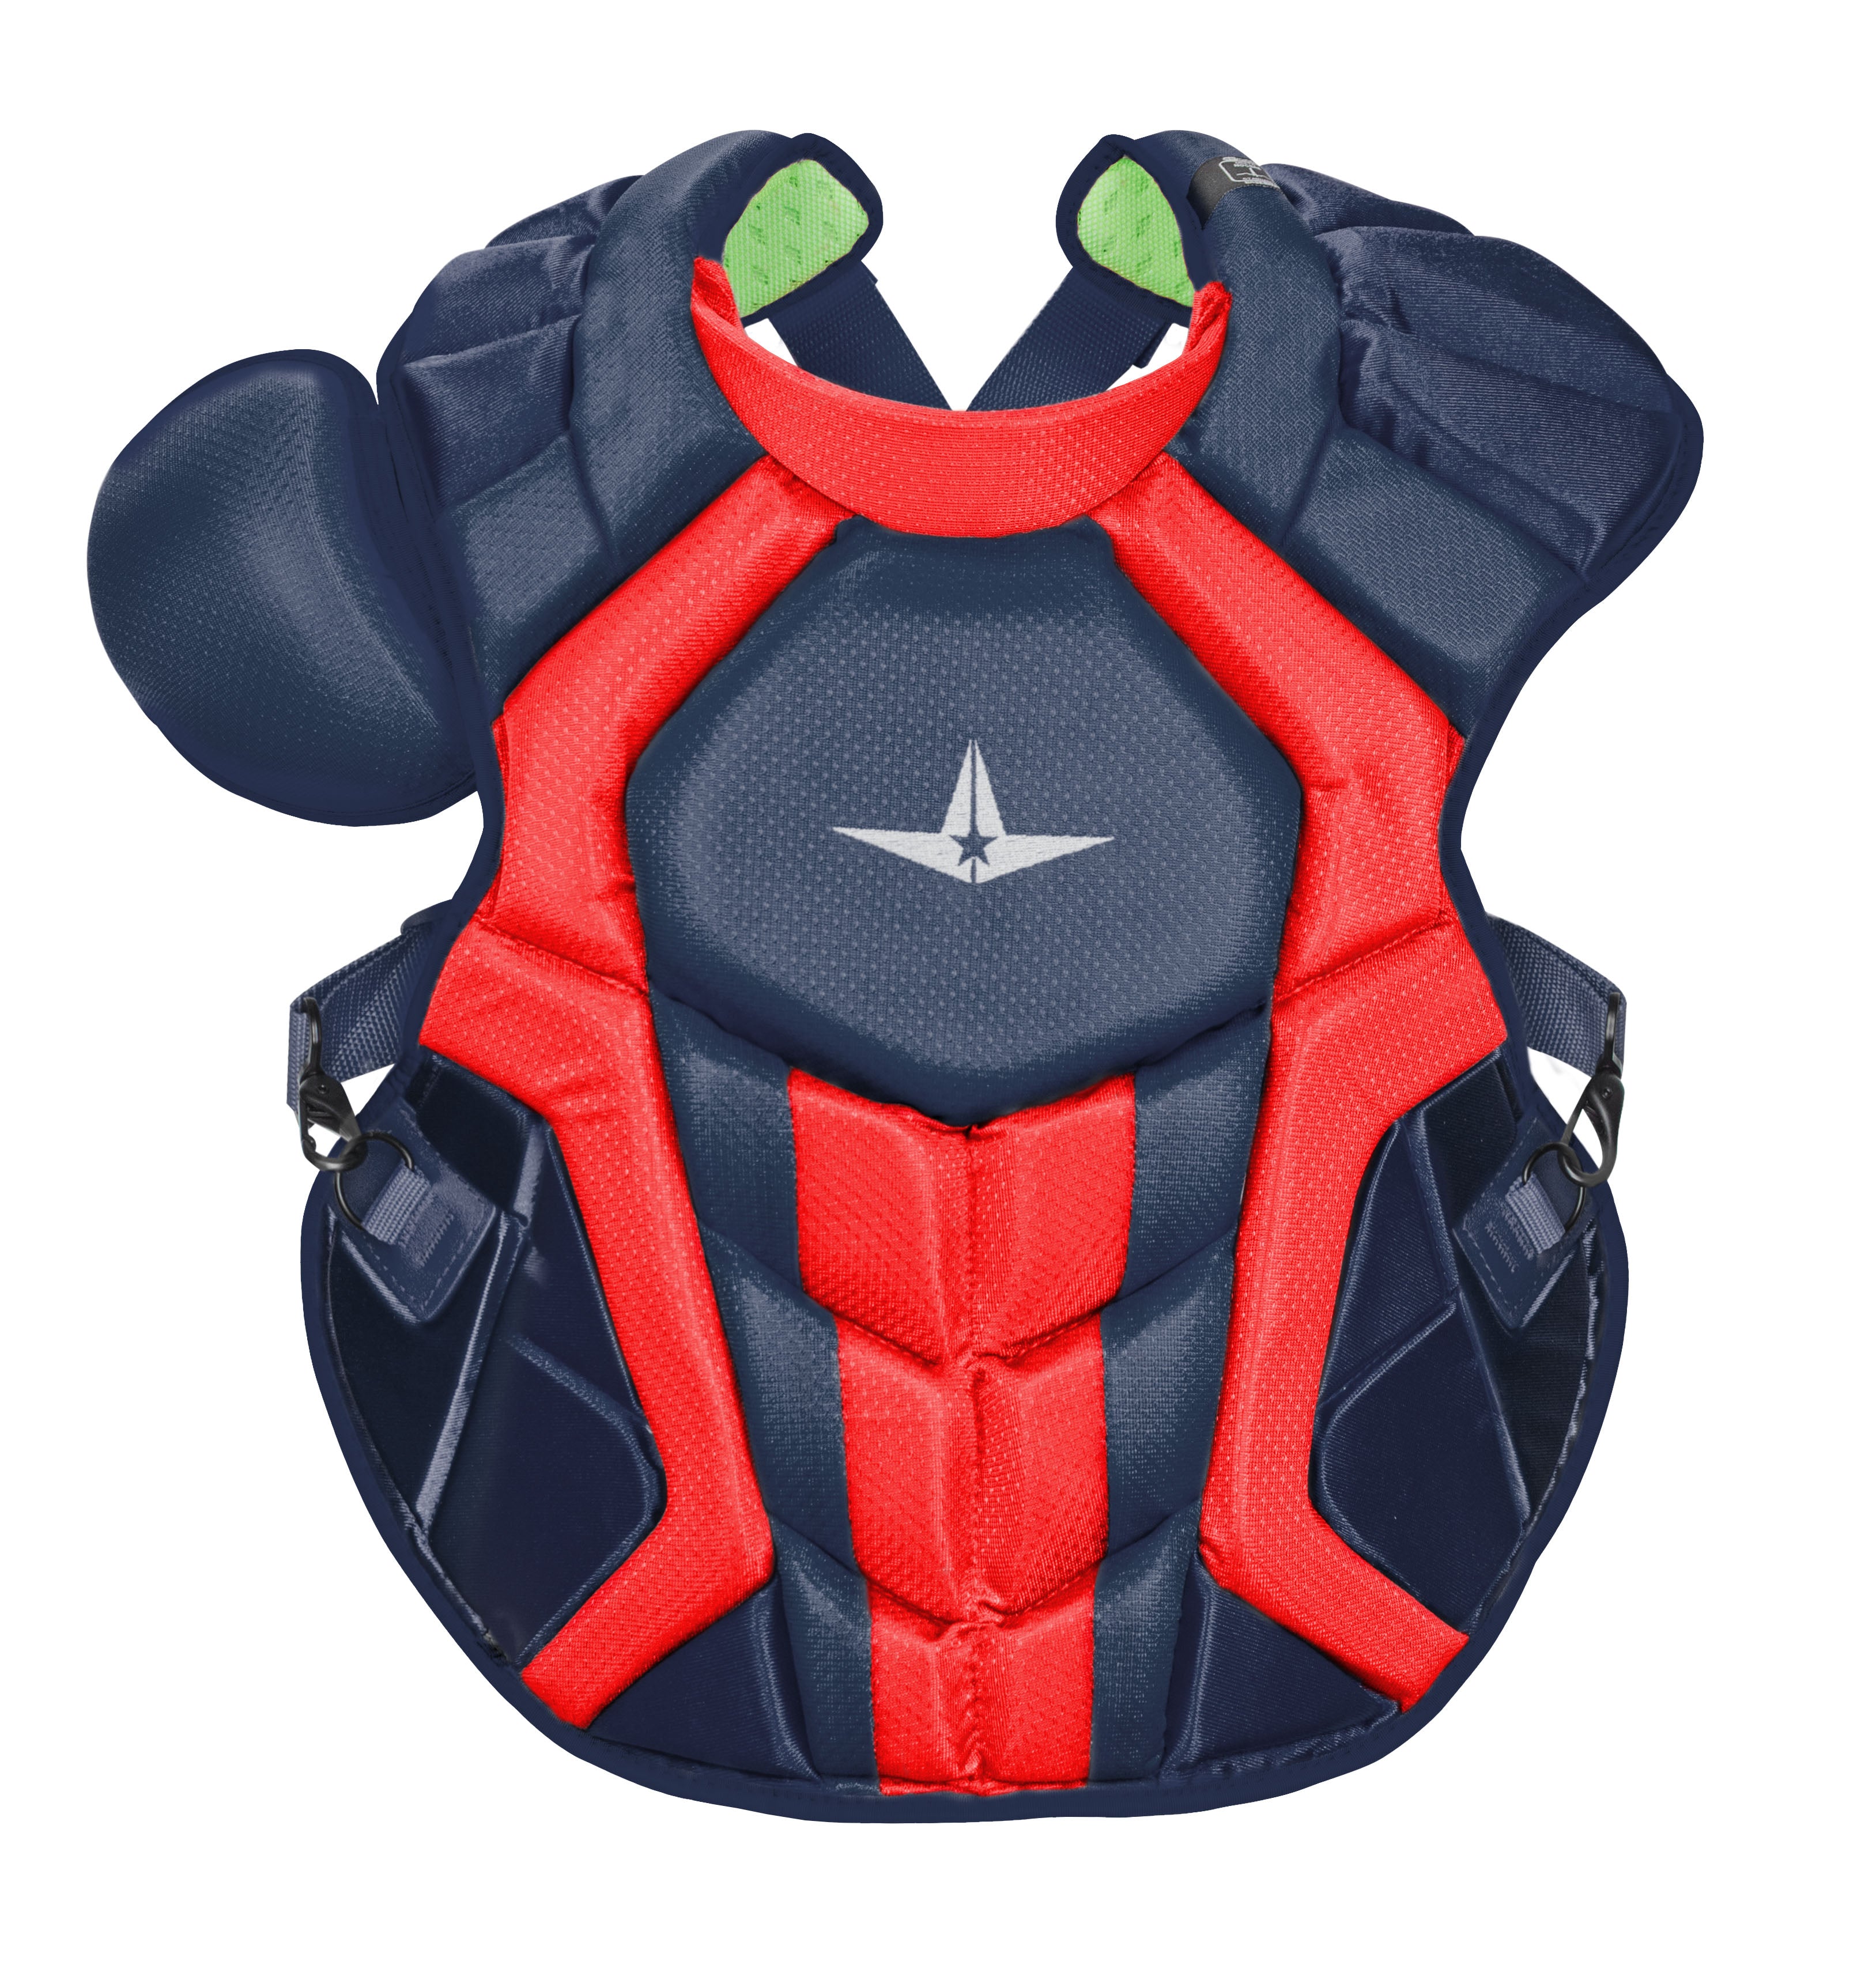 All-Star S7 Chest Protector / Meets NOCSAE / Two Tone / Adult